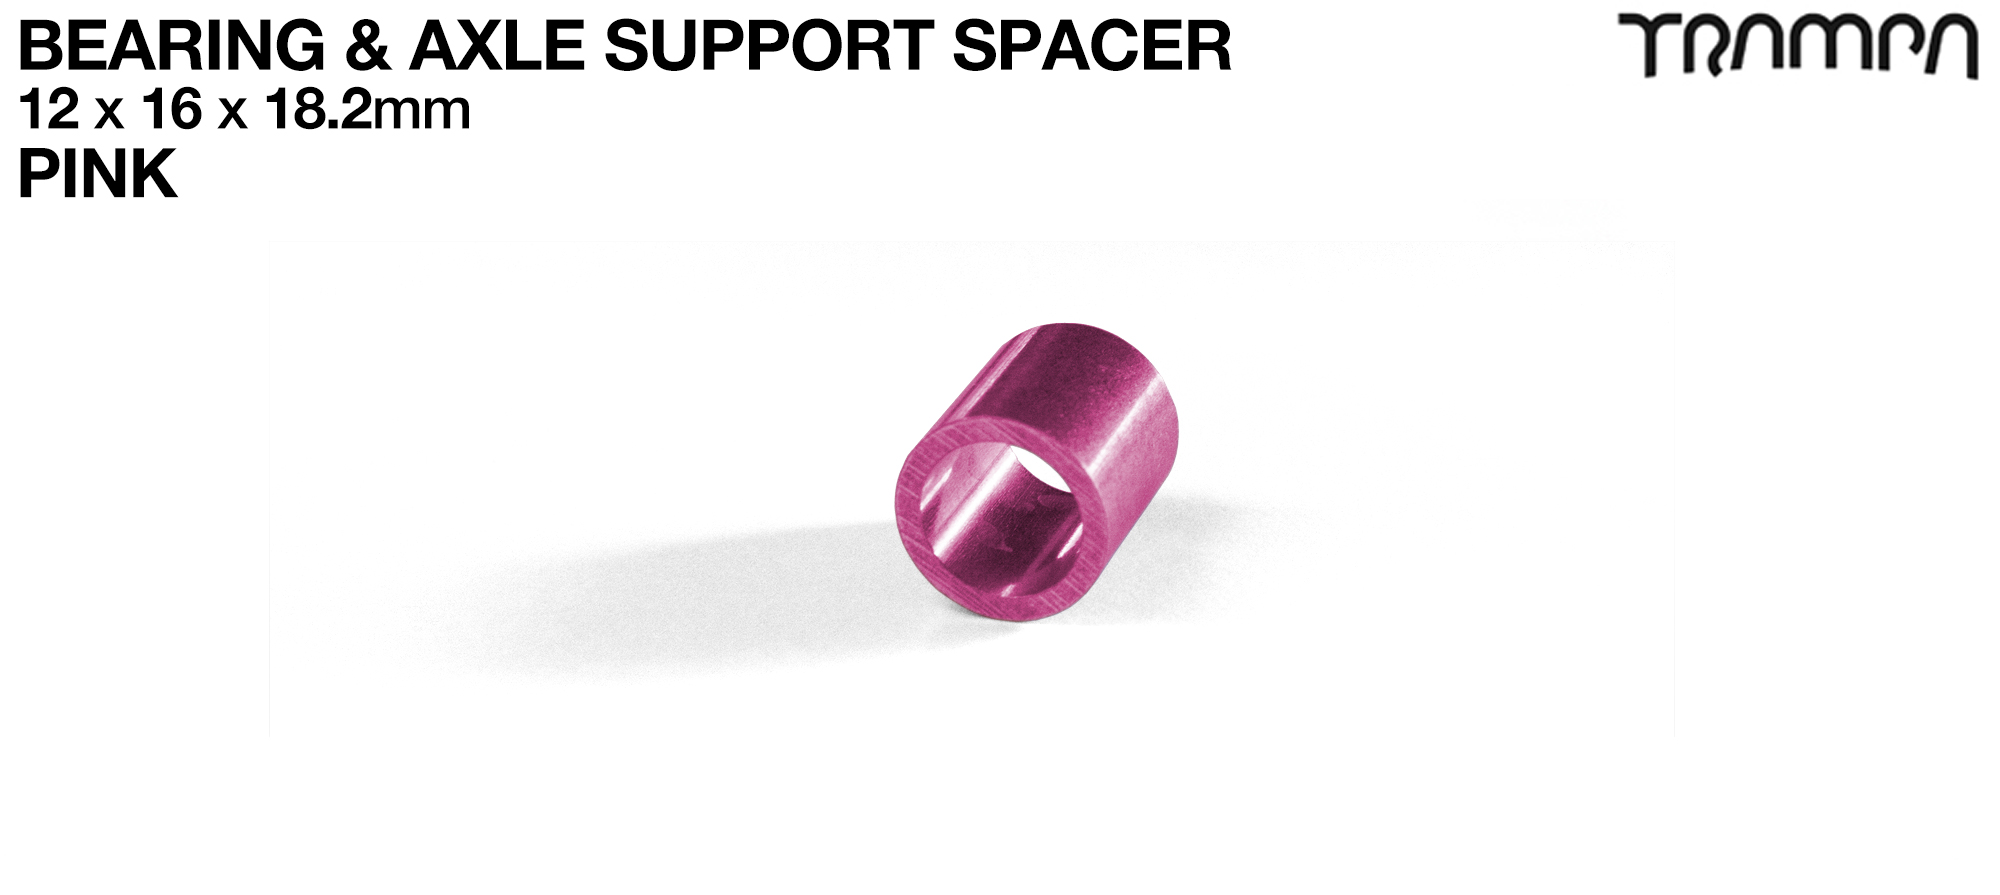 18.2mm Wheel Support Axle Spacers - PINK x4